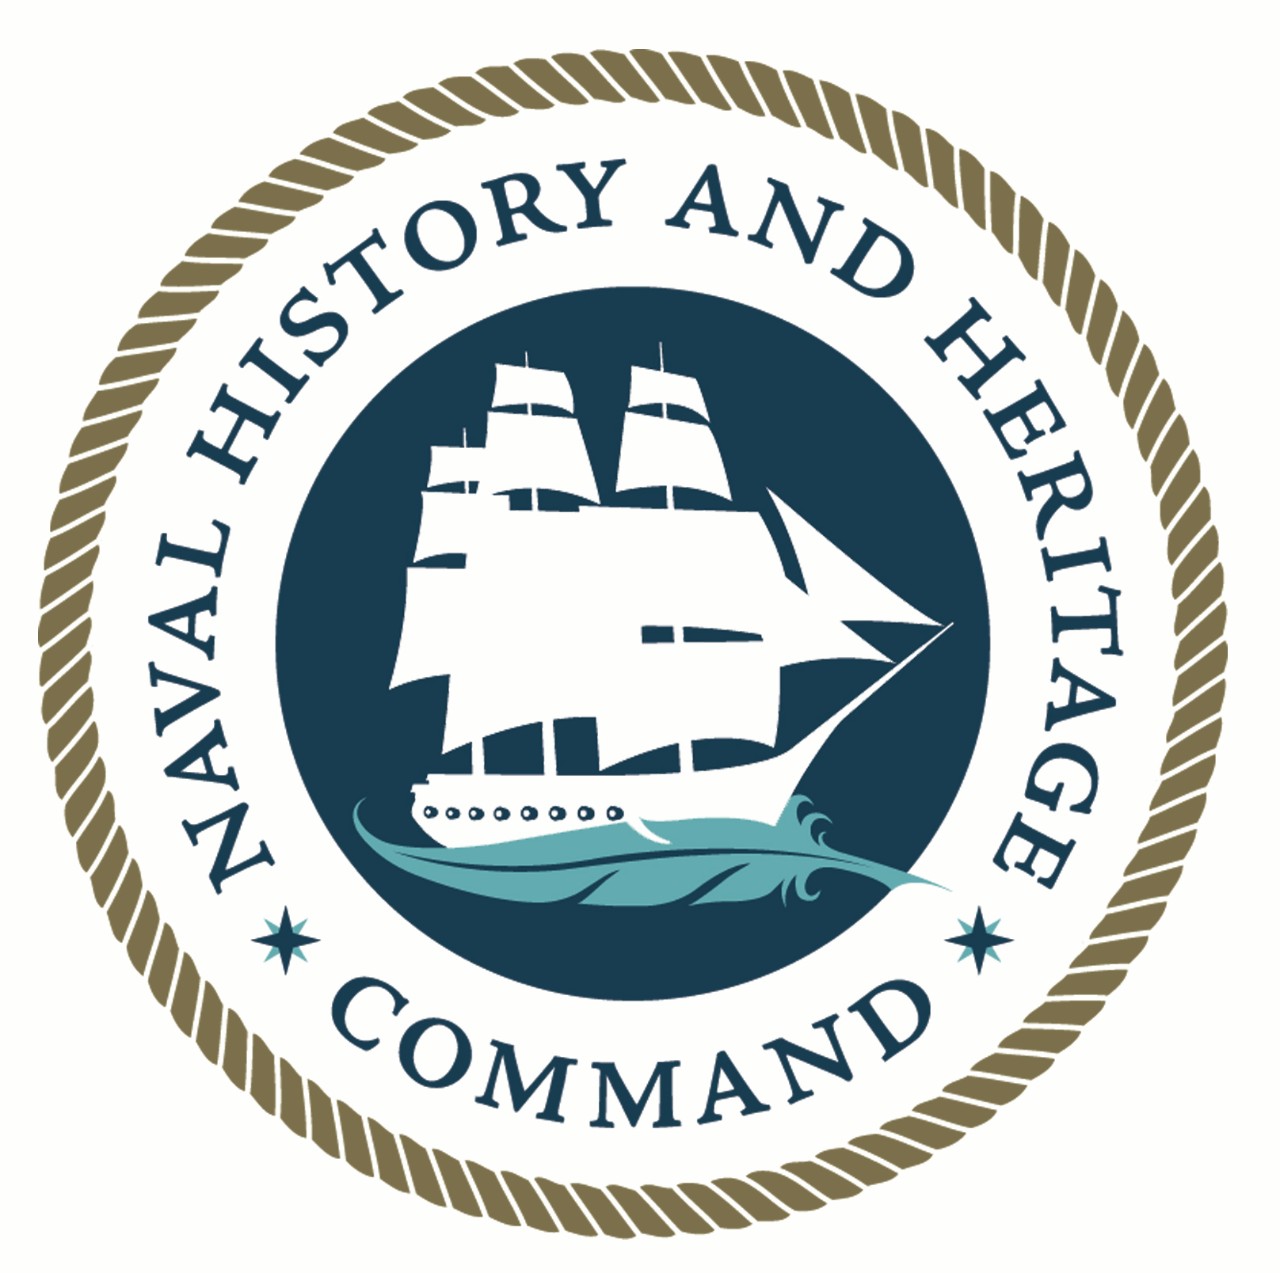 The official Naval History and Heritage Command logo.